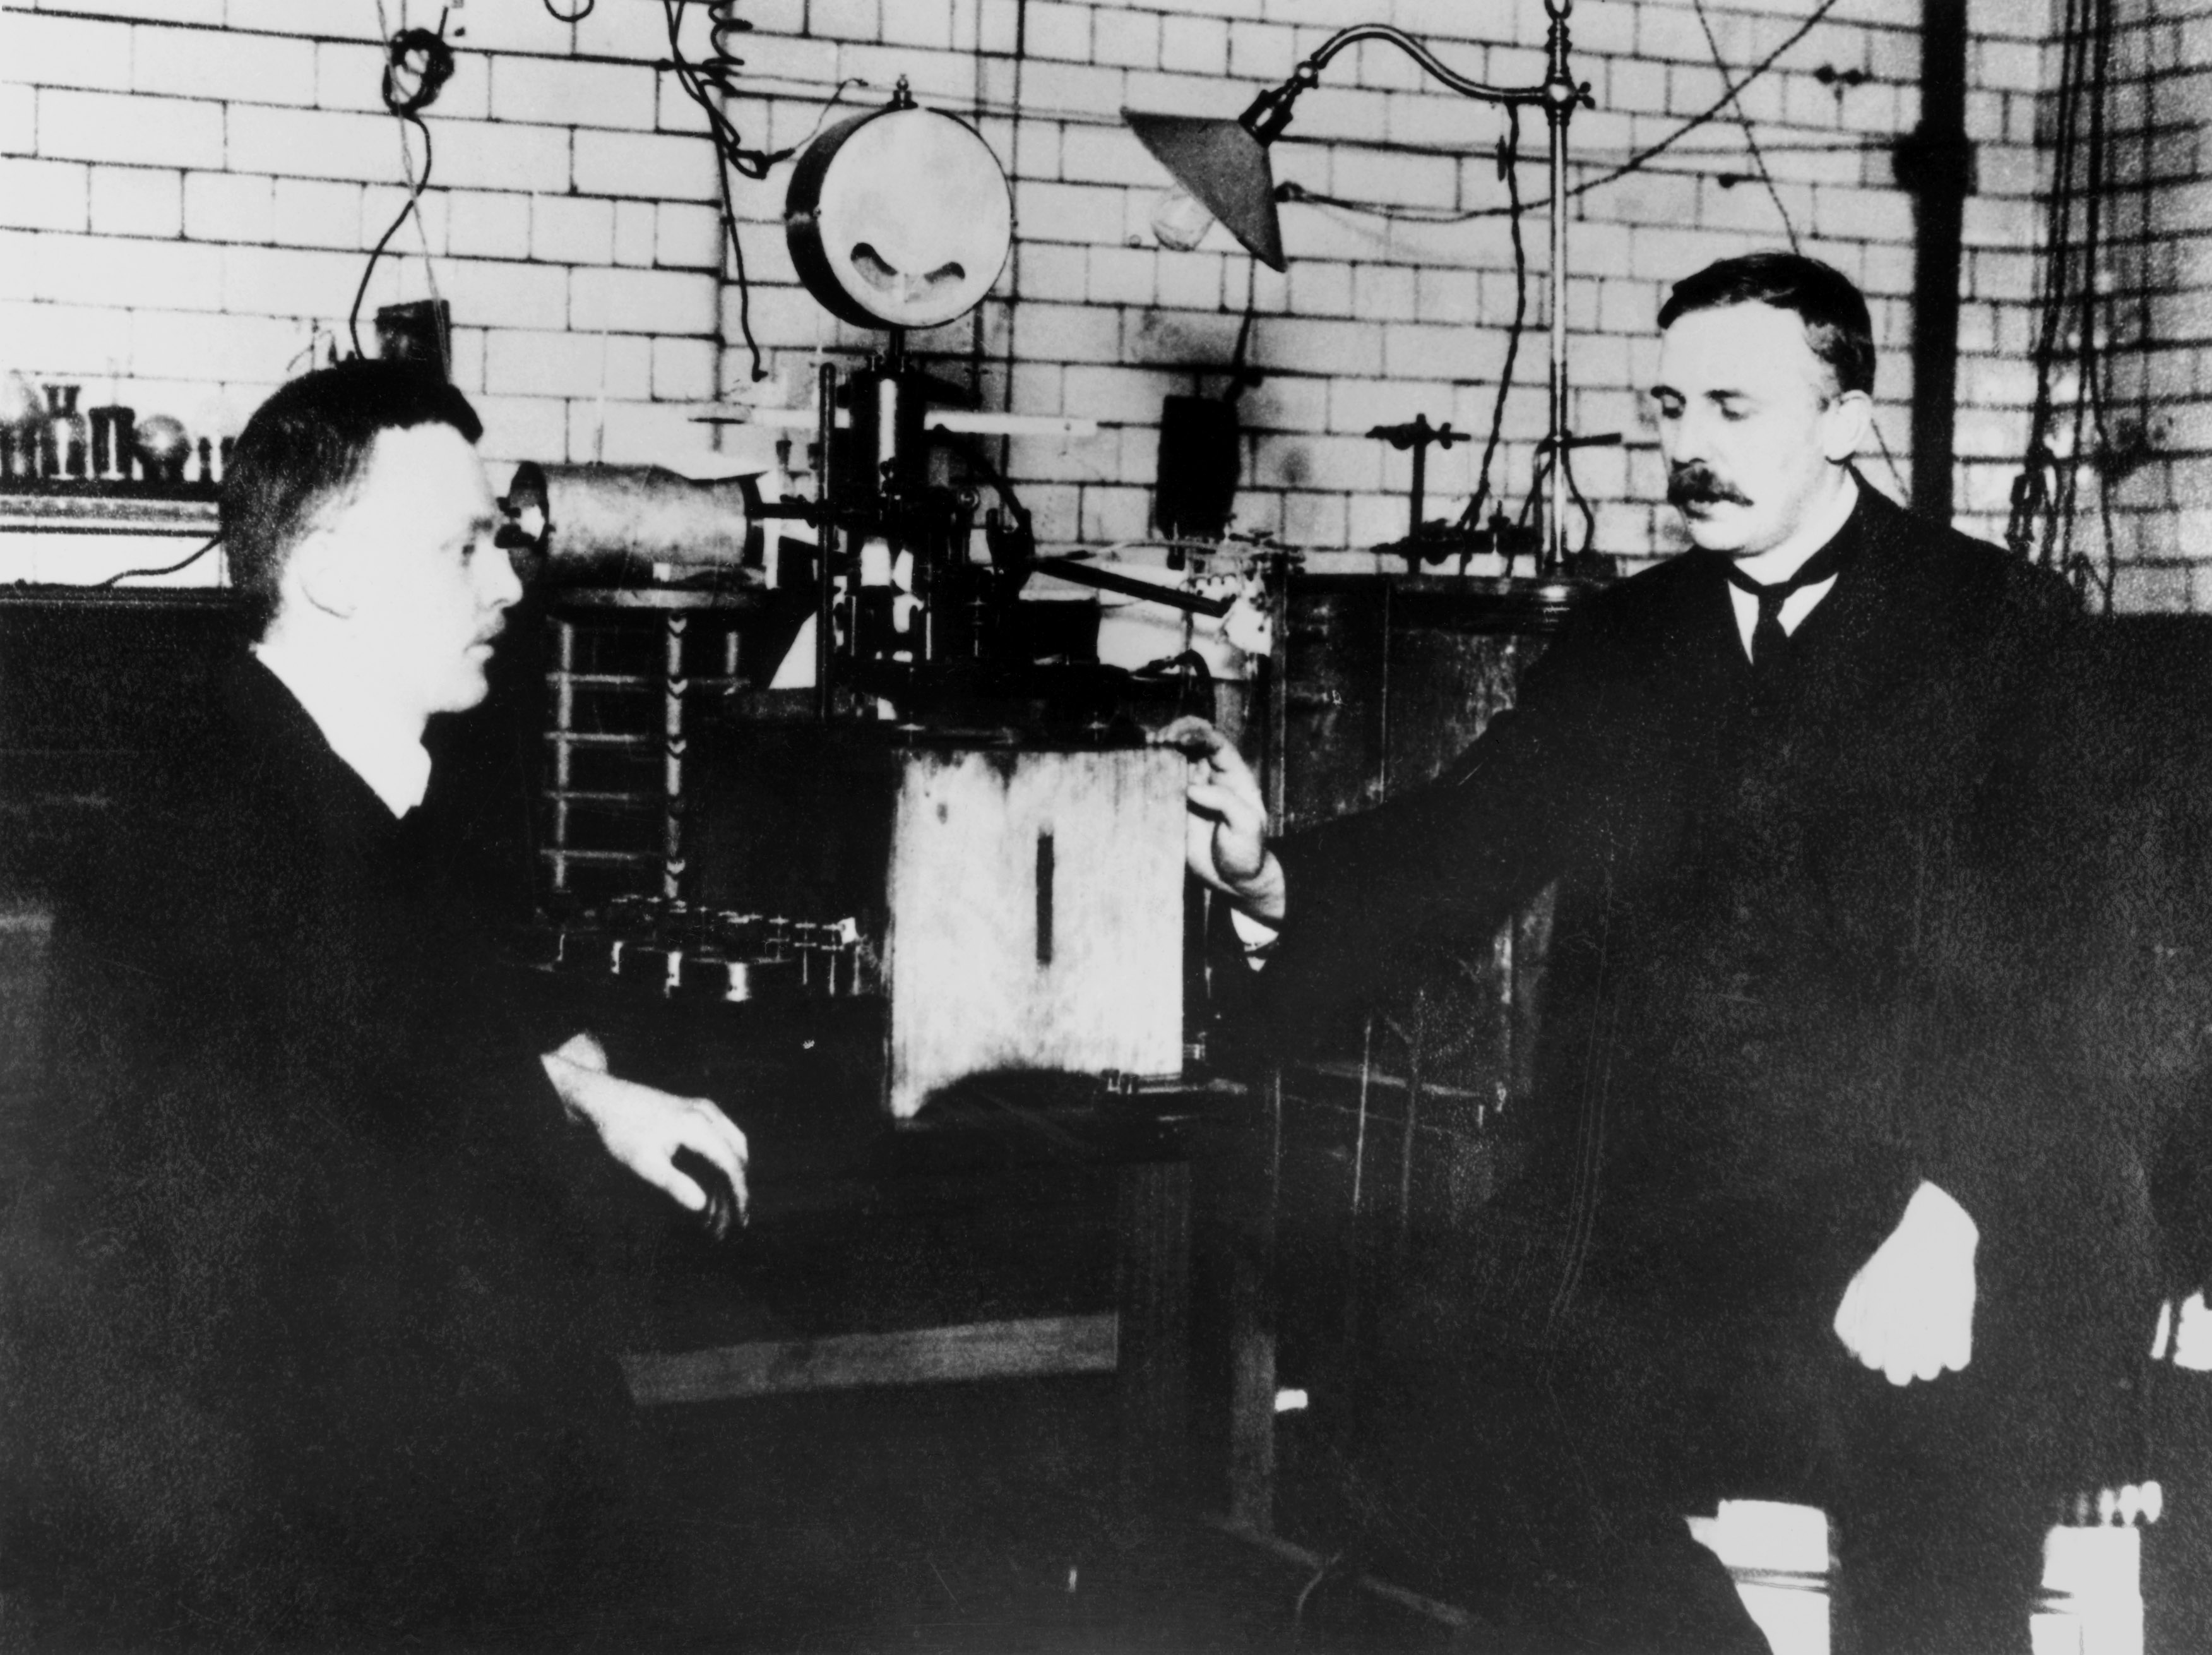 Geiger and Rutherford at Manchester, 1912. Credit: Science Museum / SSPL